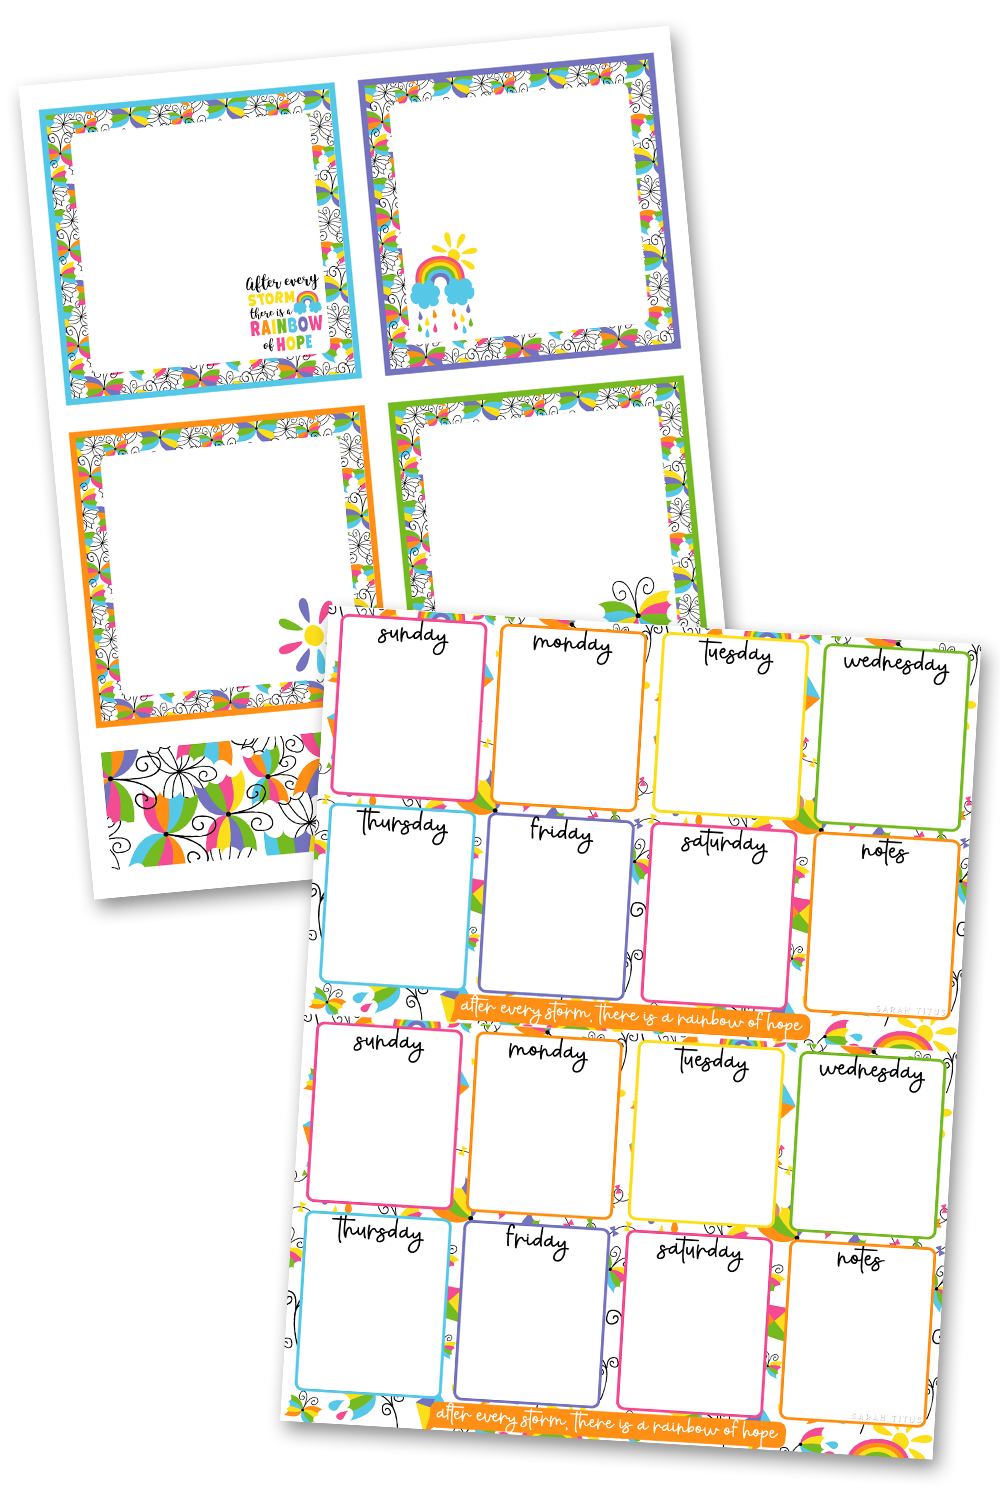 Rainbow Weekly Planner Calendar, Bookmarks and Post-It Notes